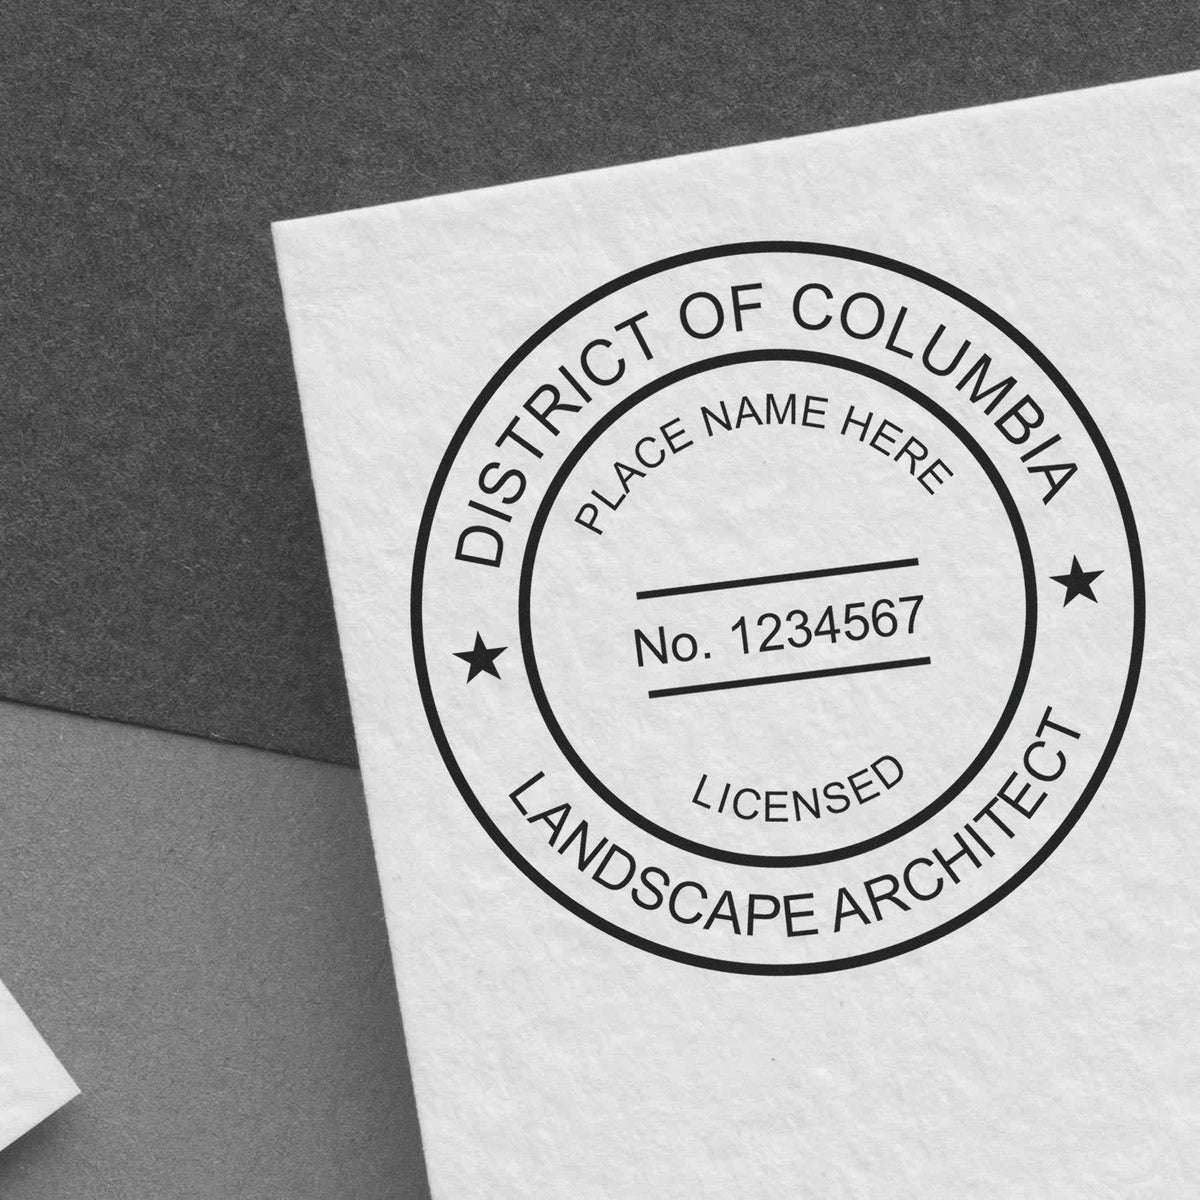 A stamped impression of the Self-Inking District of Columbia Landscape Architect Stamp in this stylish lifestyle photo, setting the tone for a unique and personalized product.